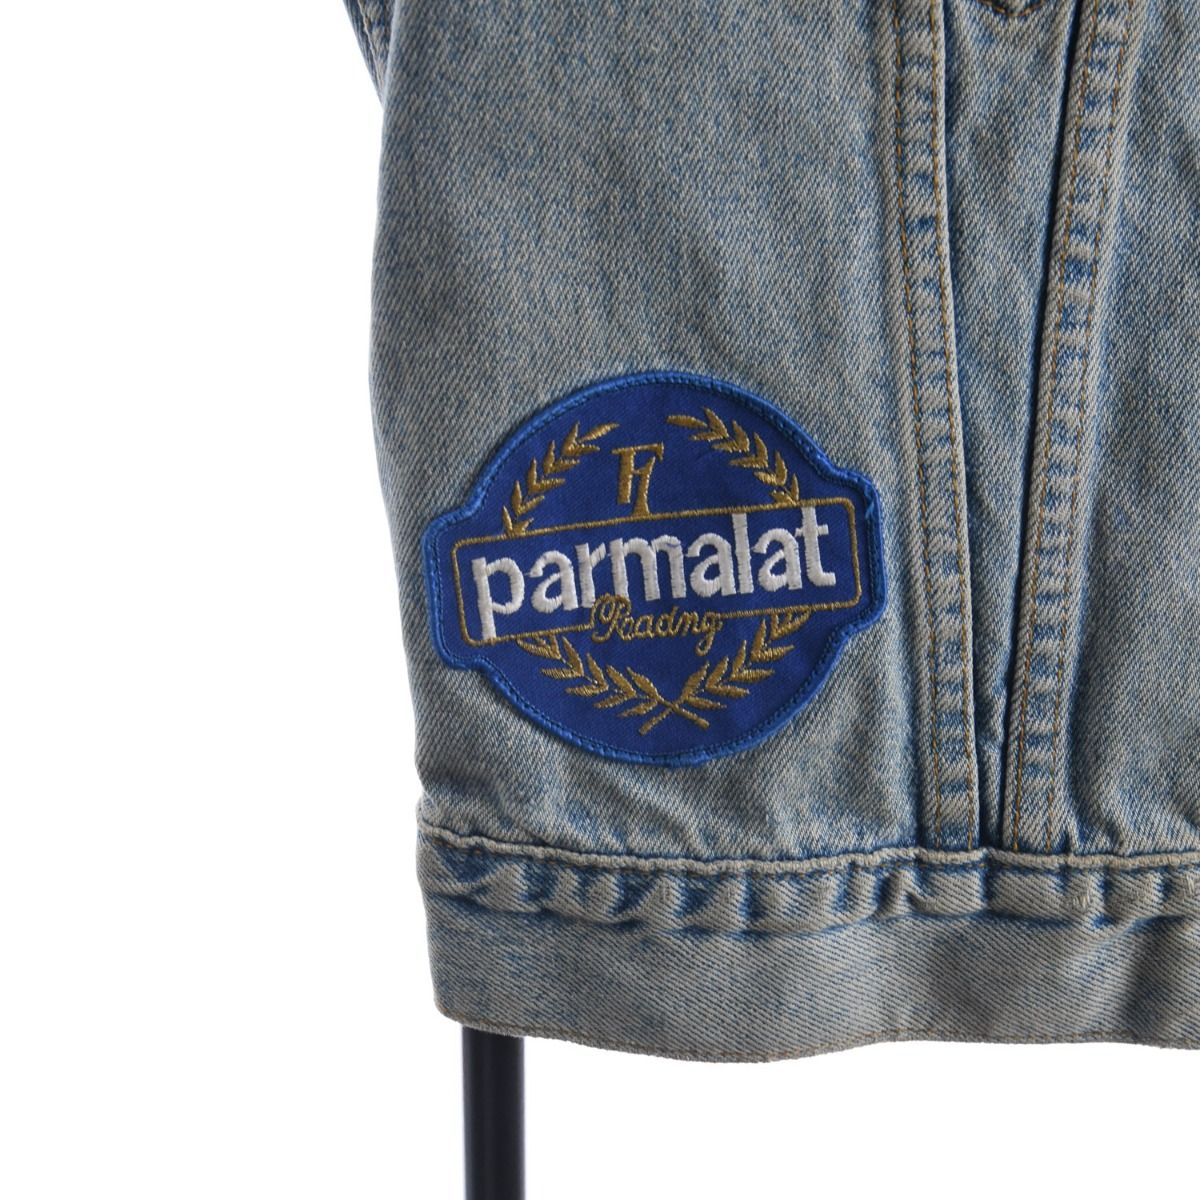 Levi’s Early 1990s Denim Vest w/ Racing Patches